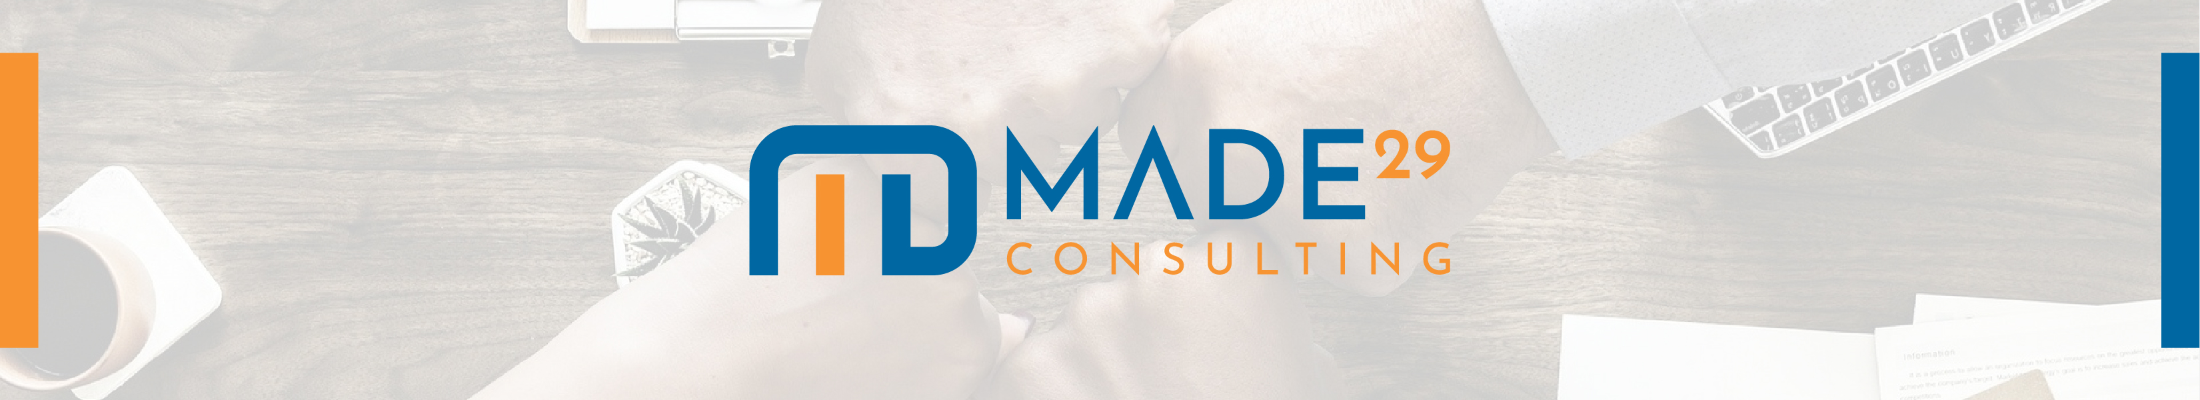 Made29 consulting AB